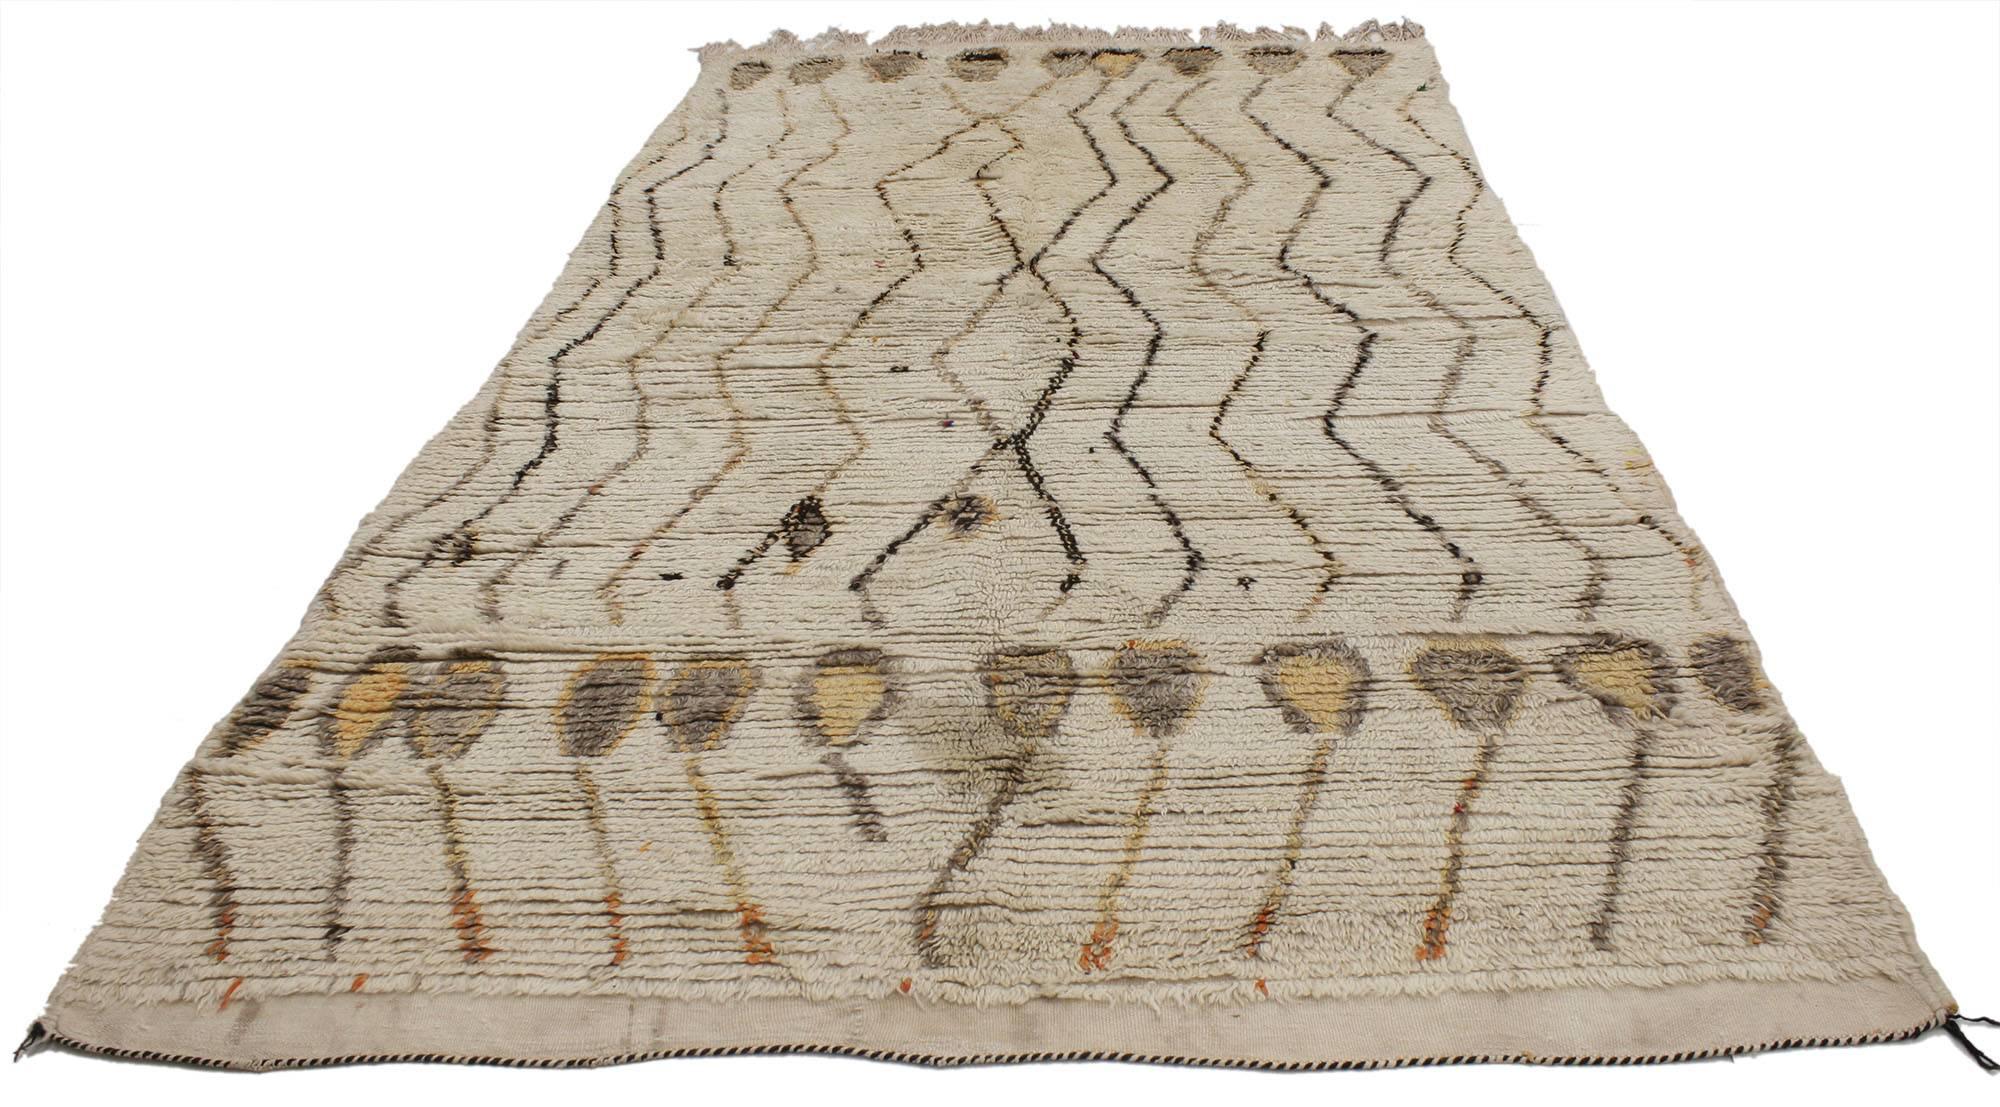 20571, Vintage Berber Moroccan Rug, Neutral Color Moroccan Rug. A creamy-beige oatmeal color provides a beautiful backdrop for the variegated shades of brown tribal design featured on this Vintage Berber Moroccan rug. More than the asymmetrical